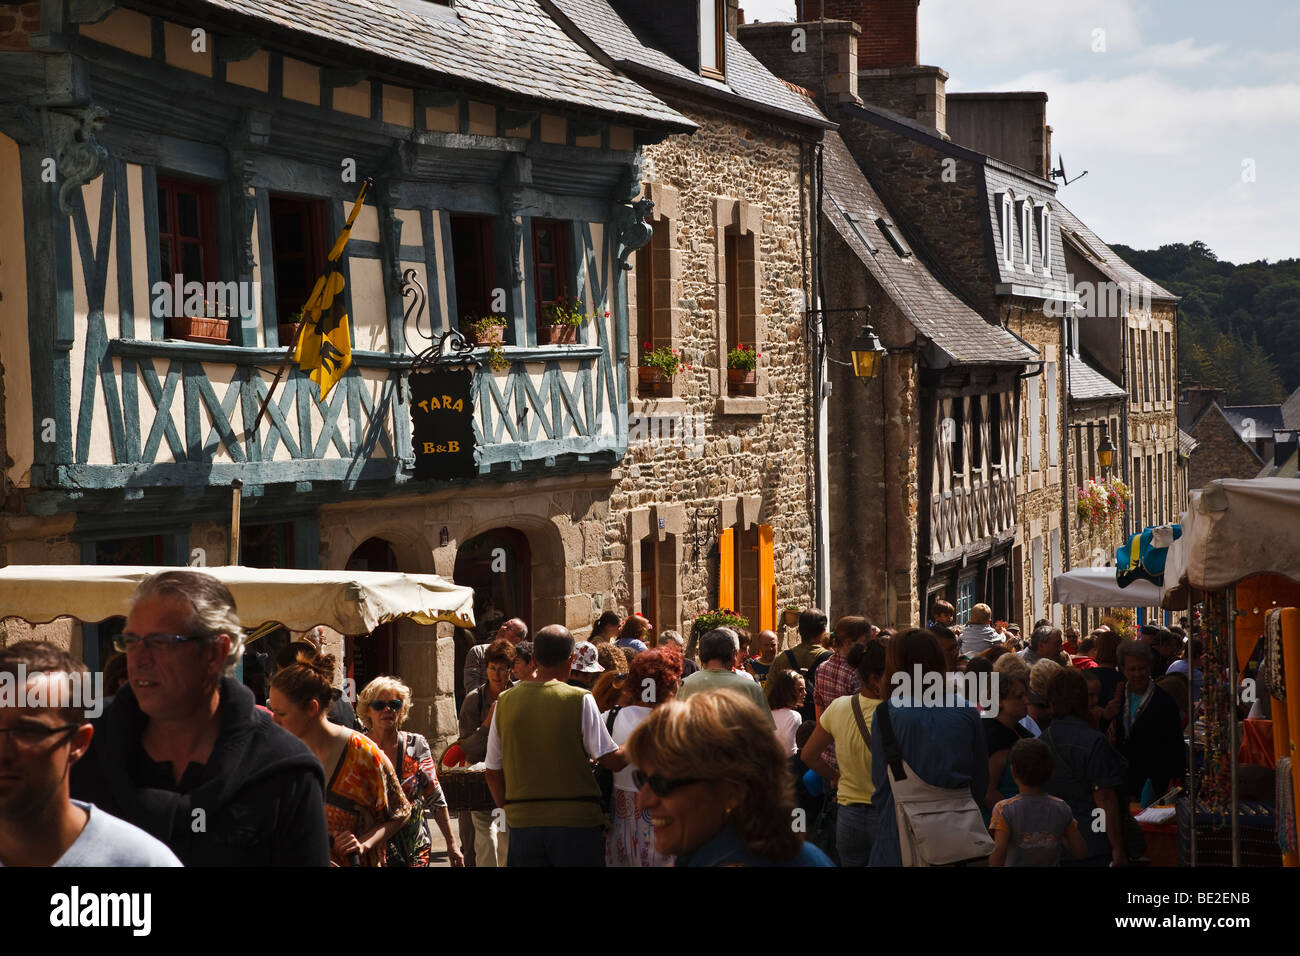 Crowds throng the narrow streets of the old town on market day at Tréguier, Côte d’Armor, Brittany, France Stock Photo